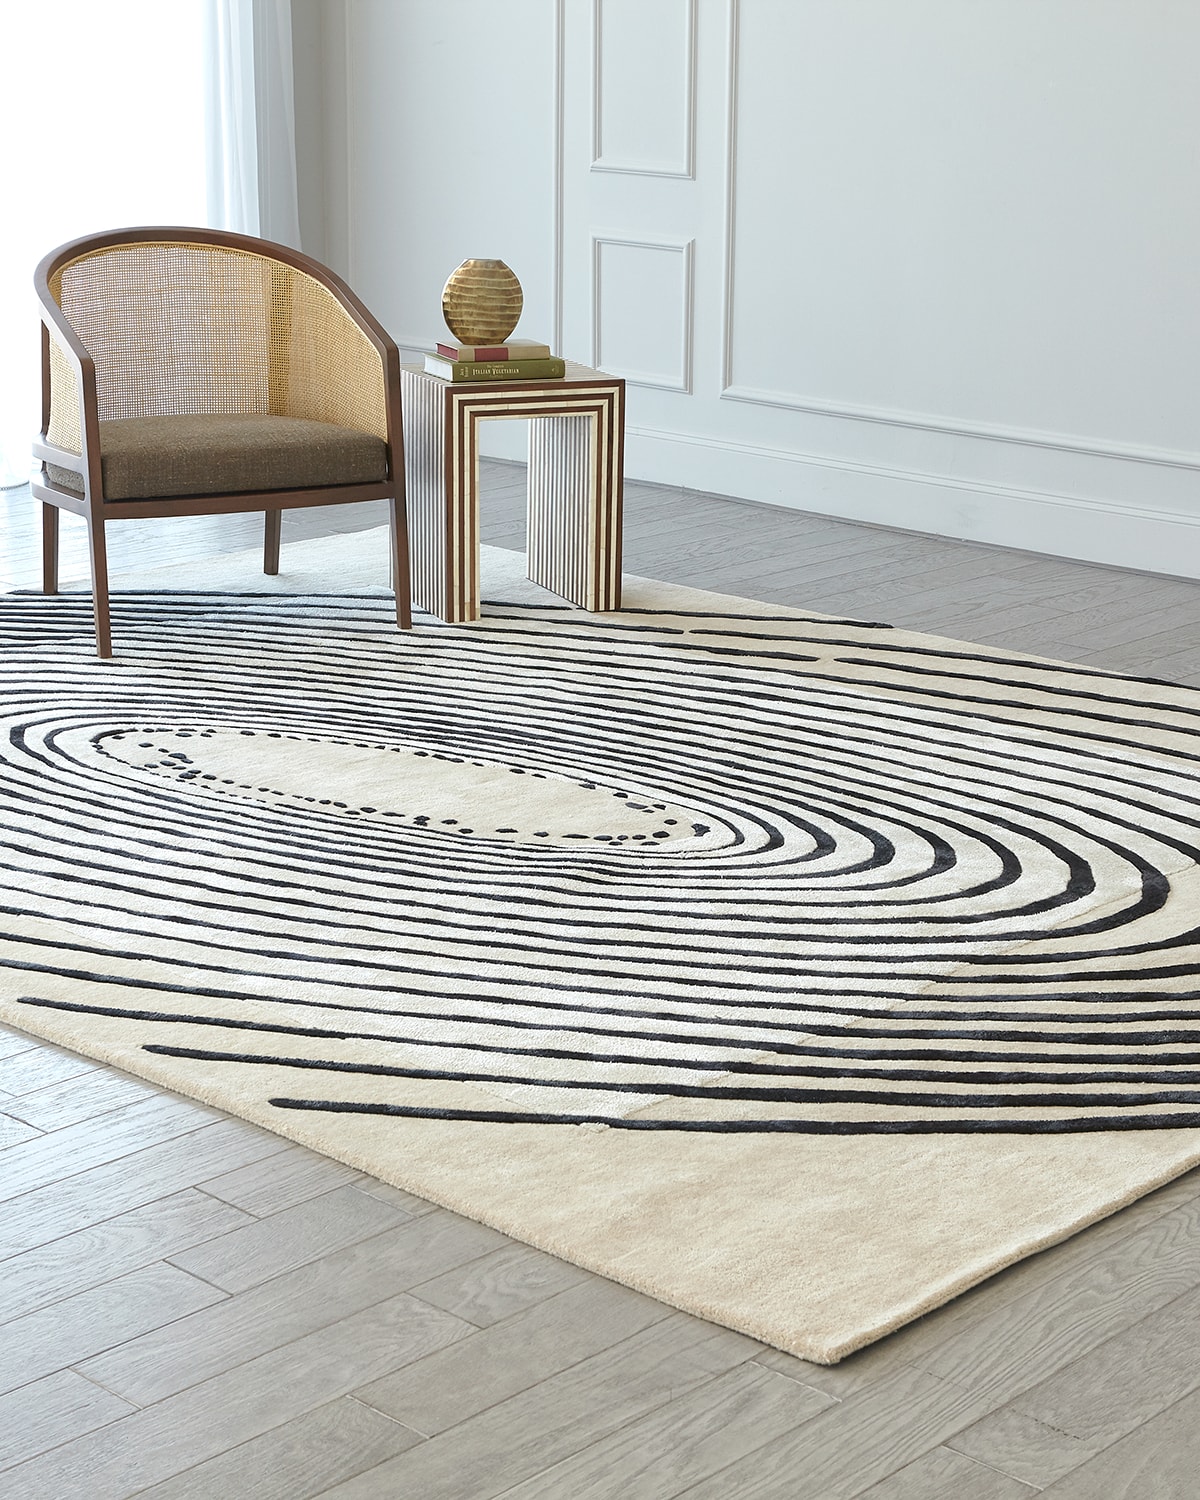 Concentric Circles Hand-Tufted Rug, 10' x 14'